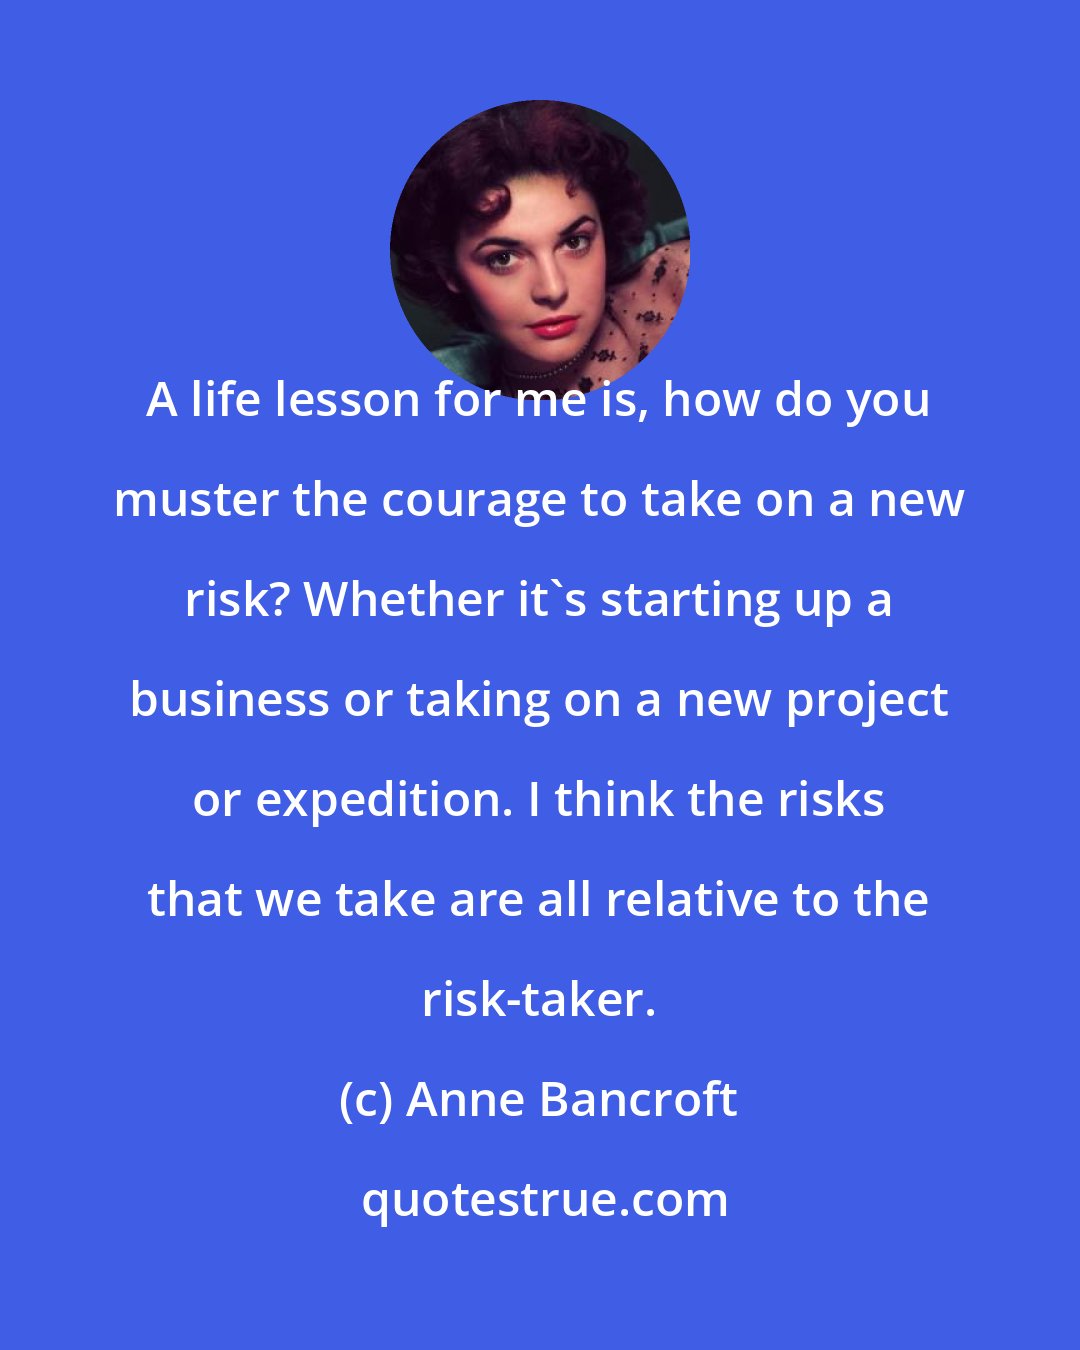 Anne Bancroft: A life lesson for me is, how do you muster the courage to take on a new risk? Whether it's starting up a business or taking on a new project or expedition. I think the risks that we take are all relative to the risk-taker.